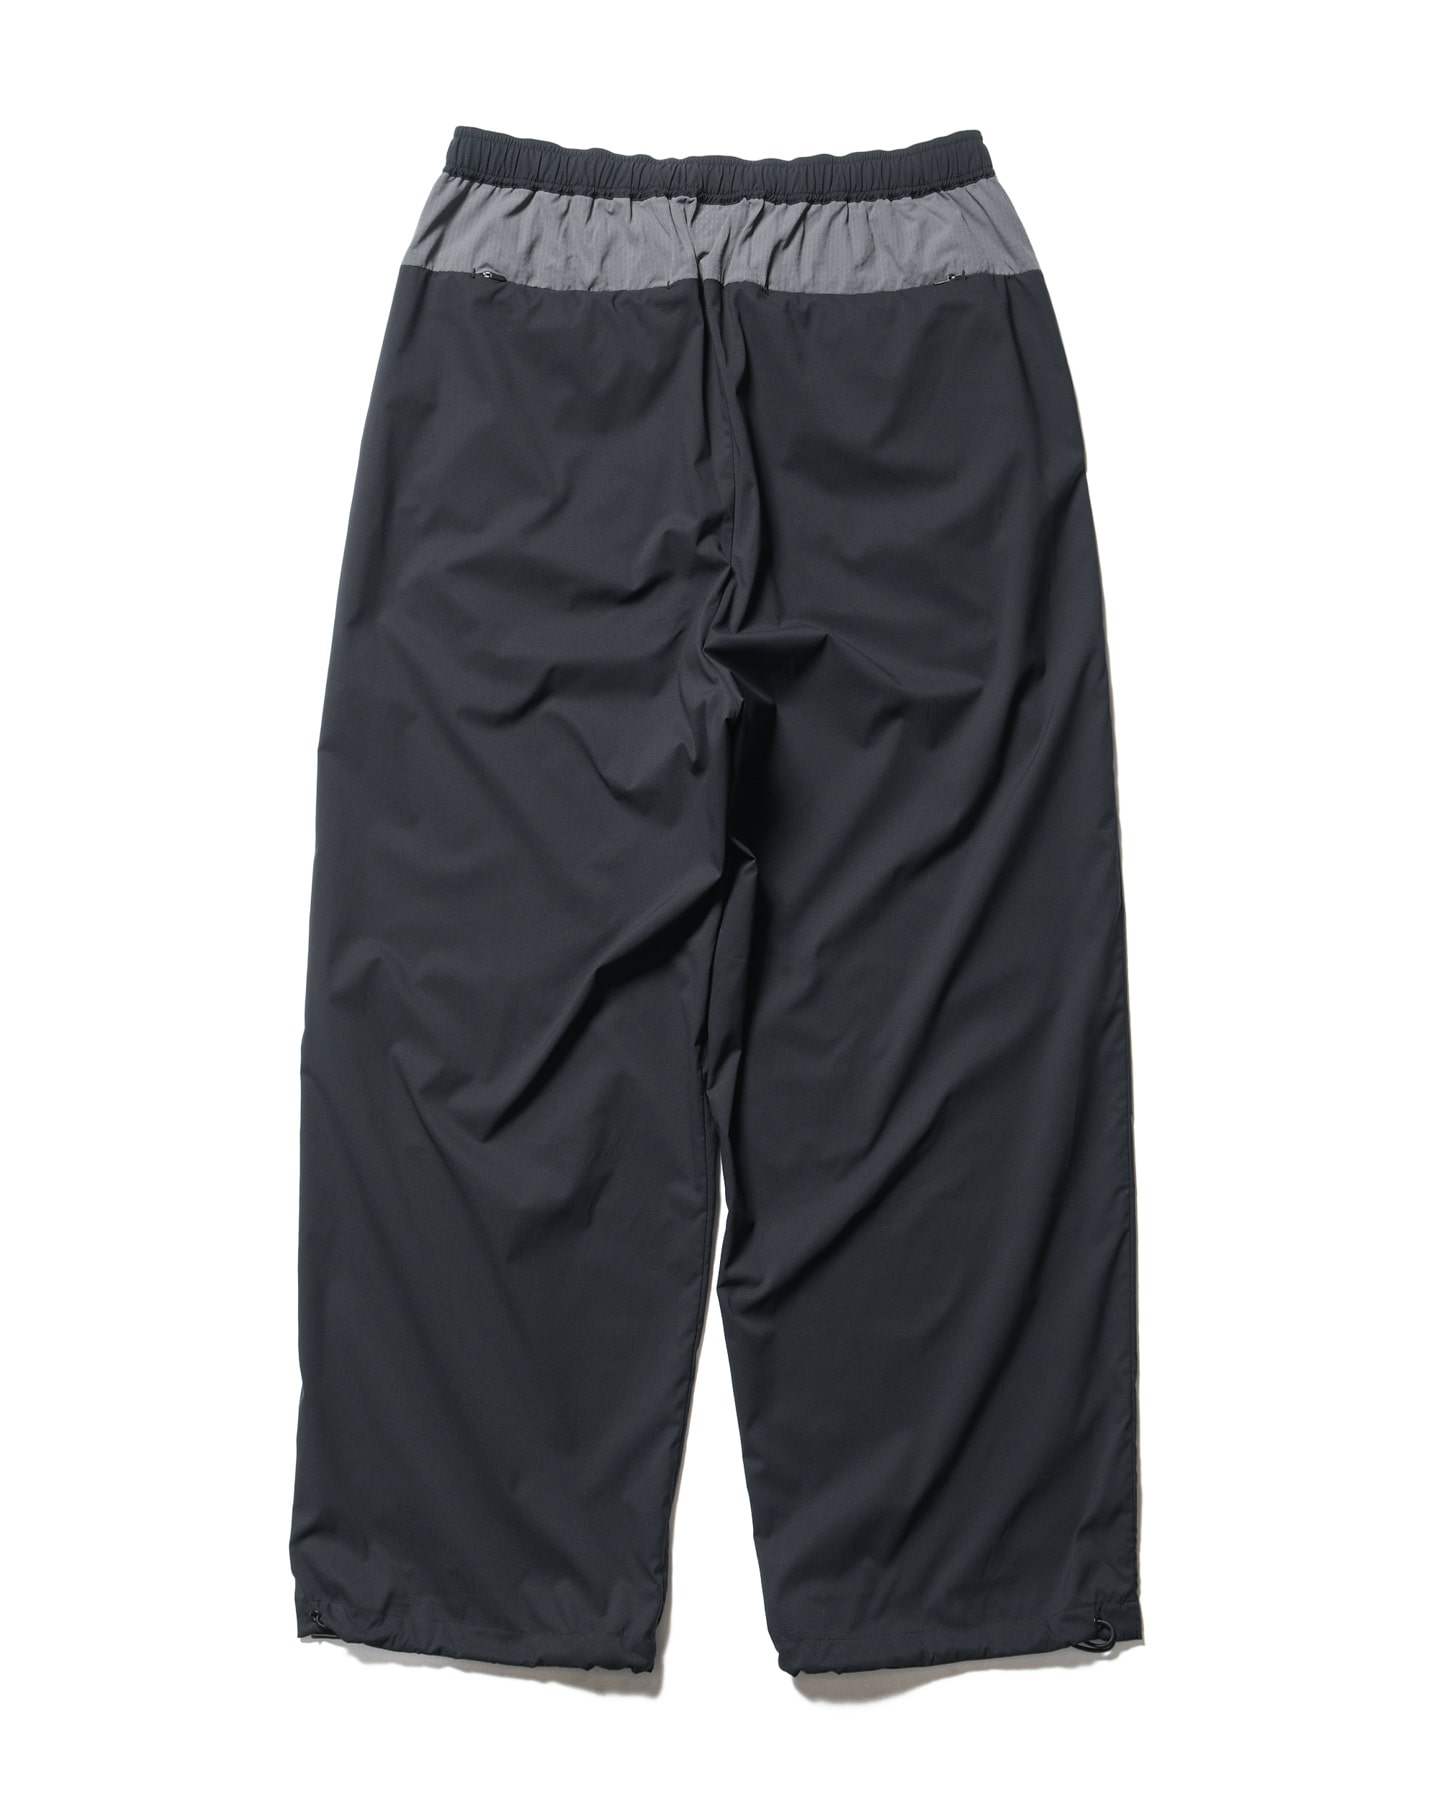 SOPH. | STRETCH LIGHT WEIGHT RELAX PANTS(M BLACK):